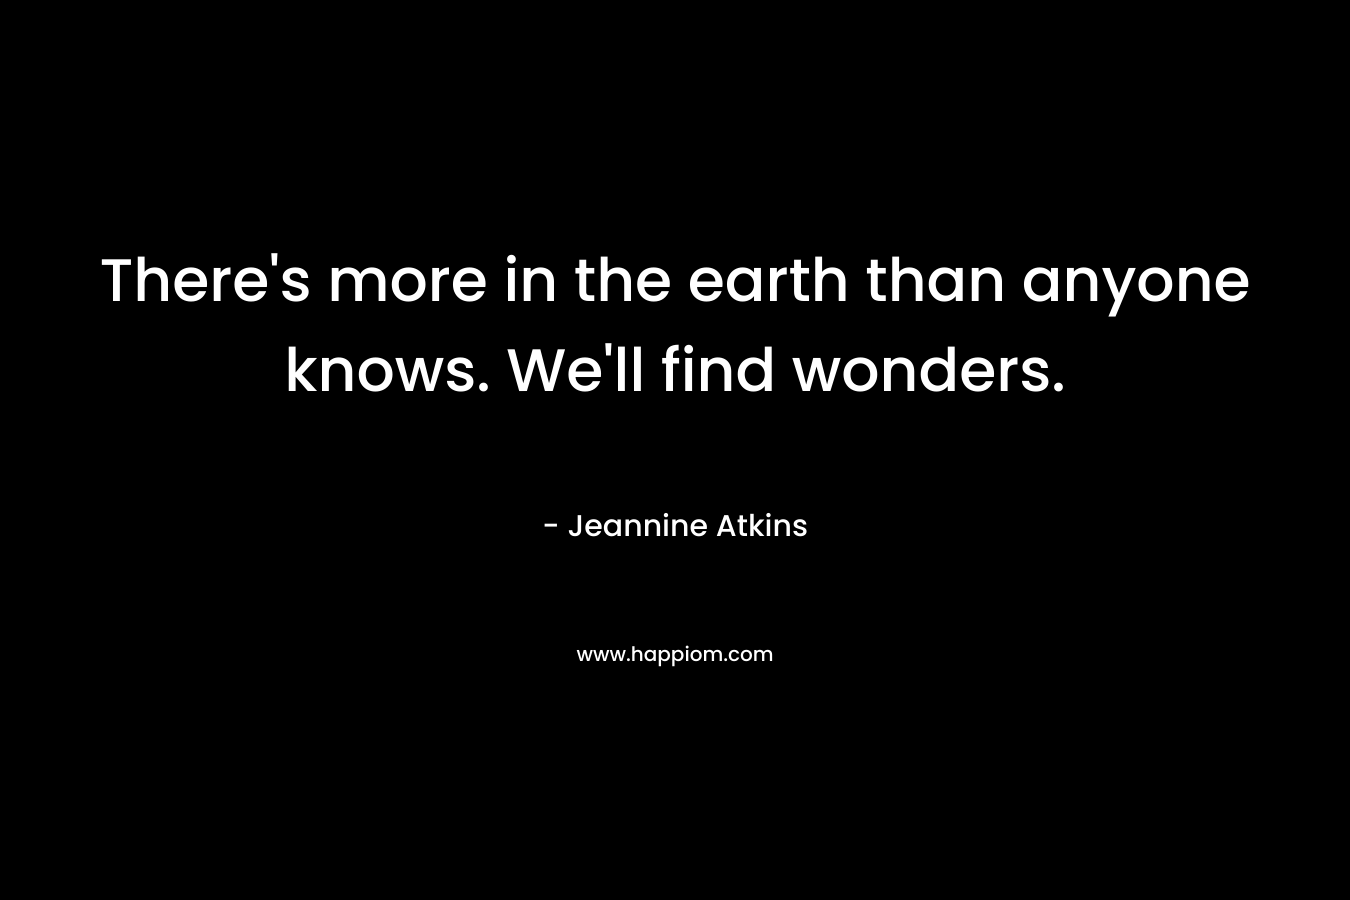 There's more in the earth than anyone knows. We'll find wonders.